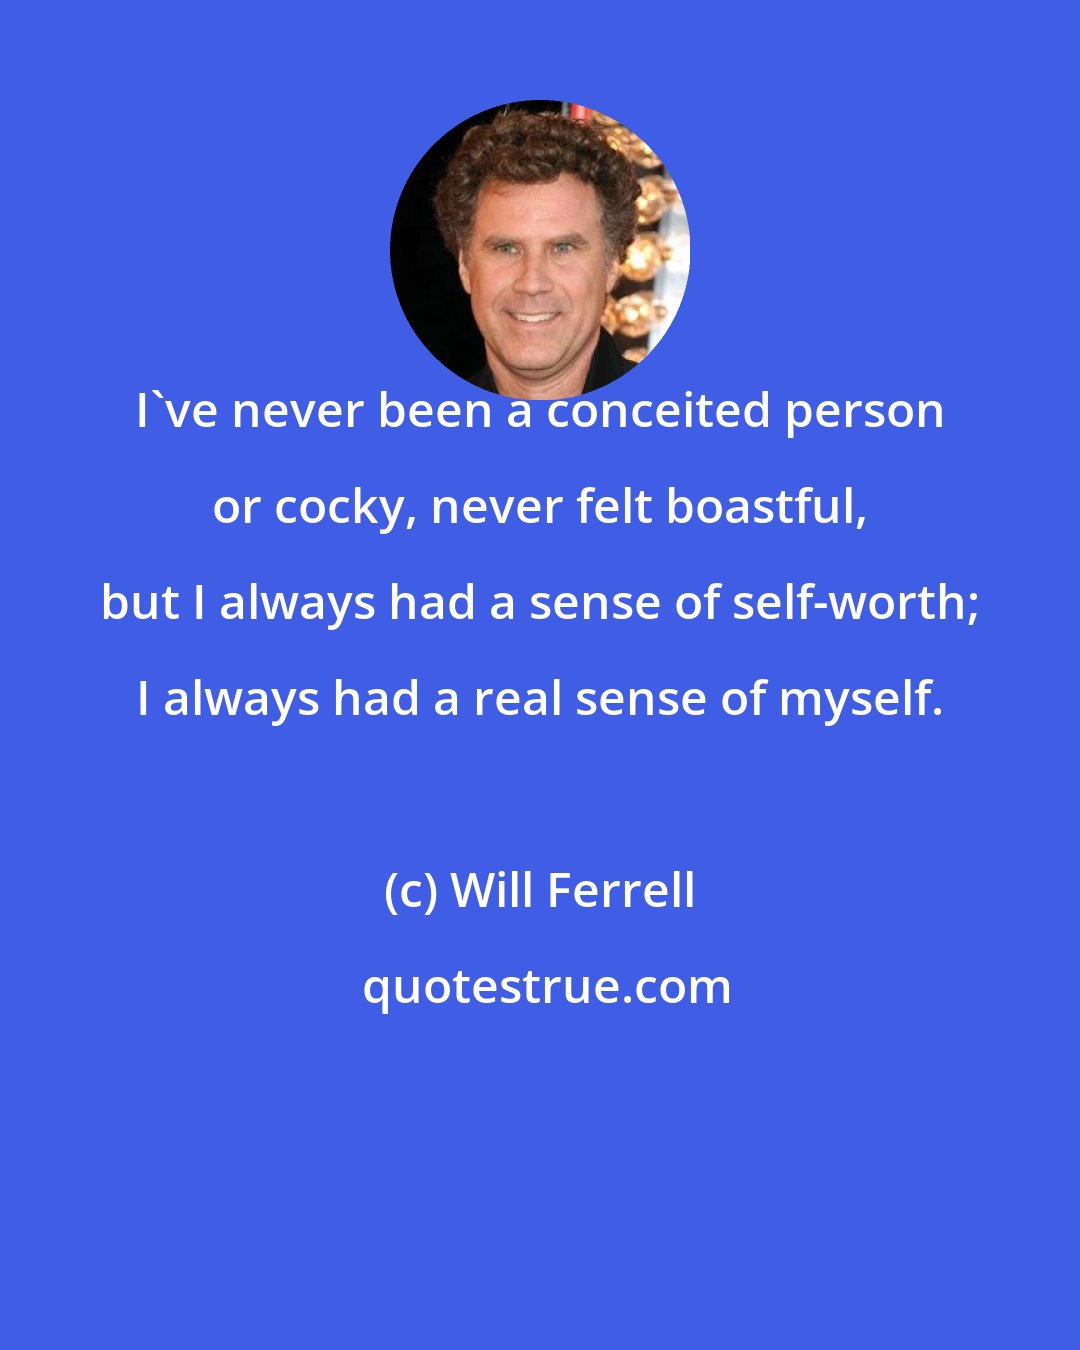 Will Ferrell: I've never been a conceited person or cocky, never felt boastful, but I always had a sense of self-worth; I always had a real sense of myself.